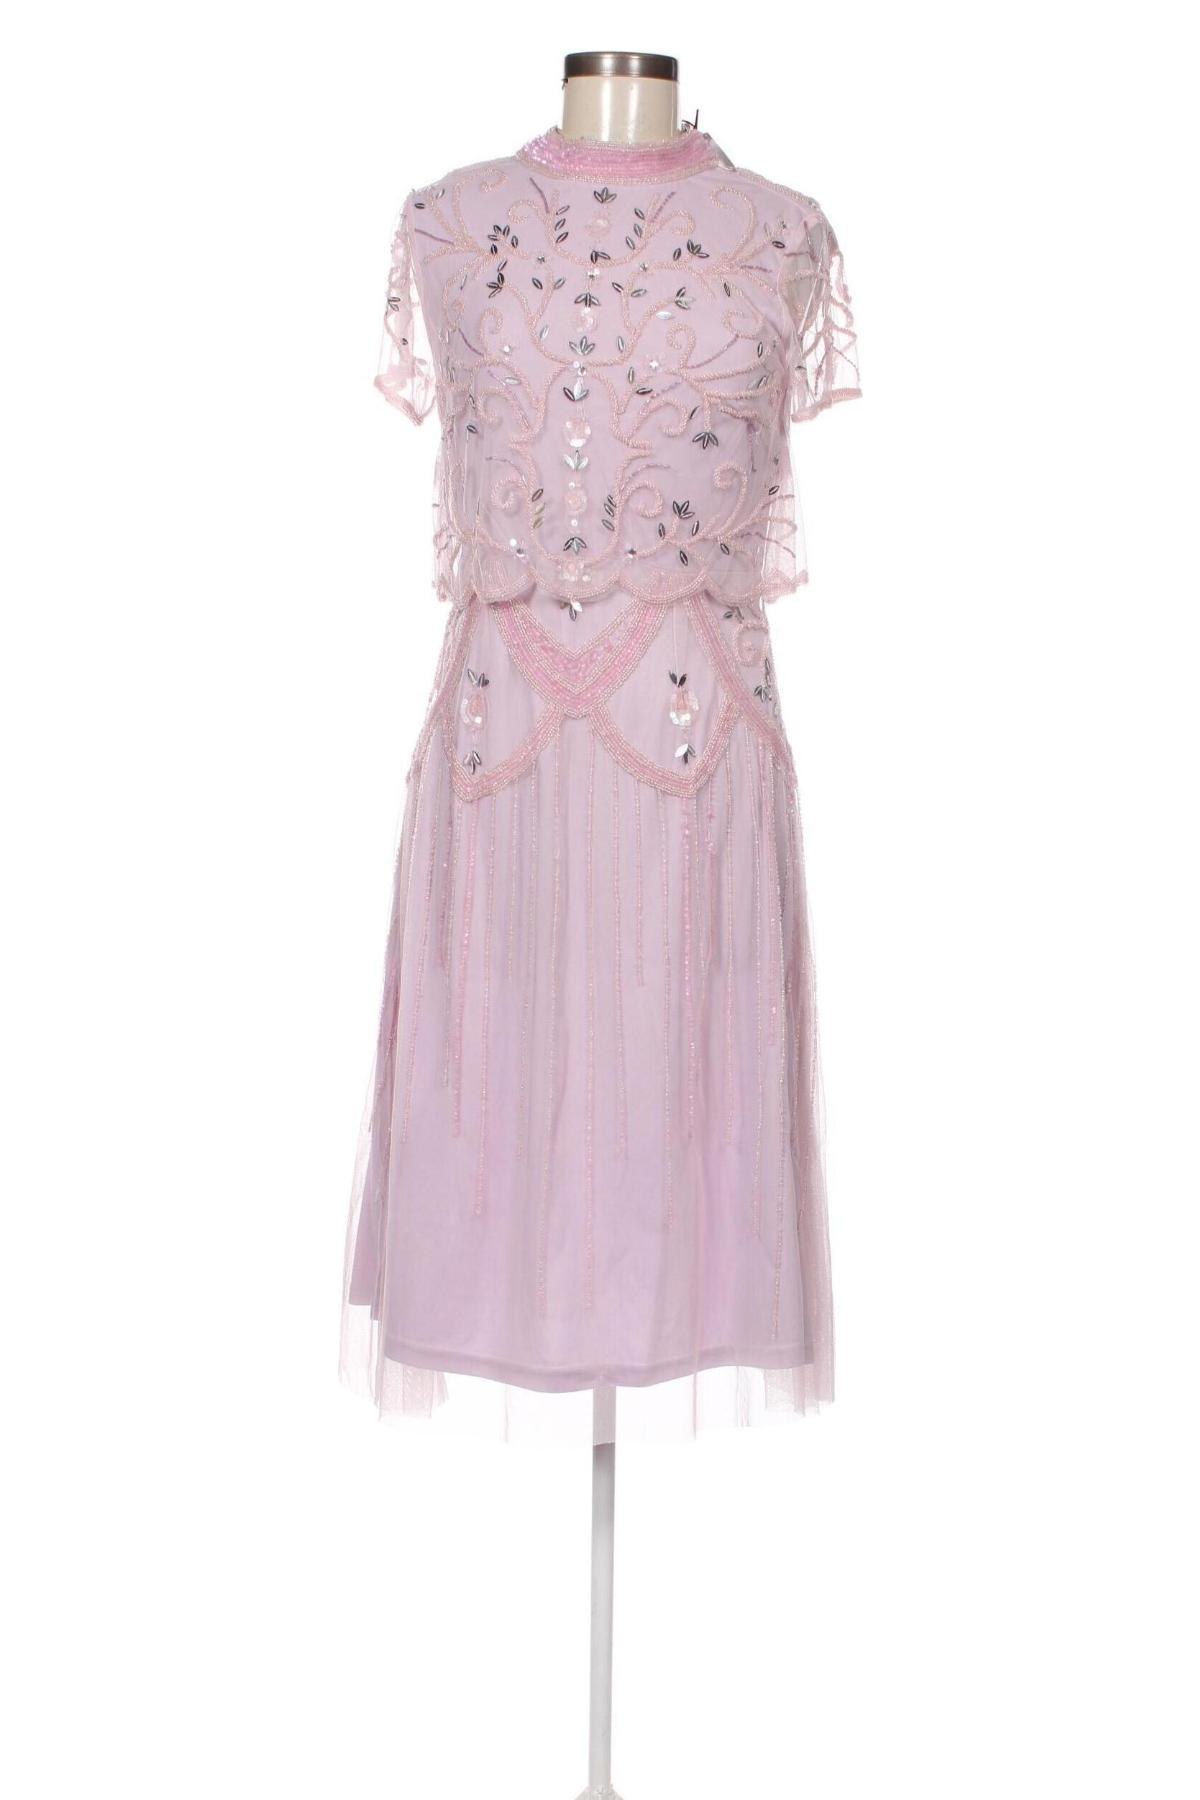 Kleid Frock And Frill, Größe M, Farbe Rosa, Preis € 17,65